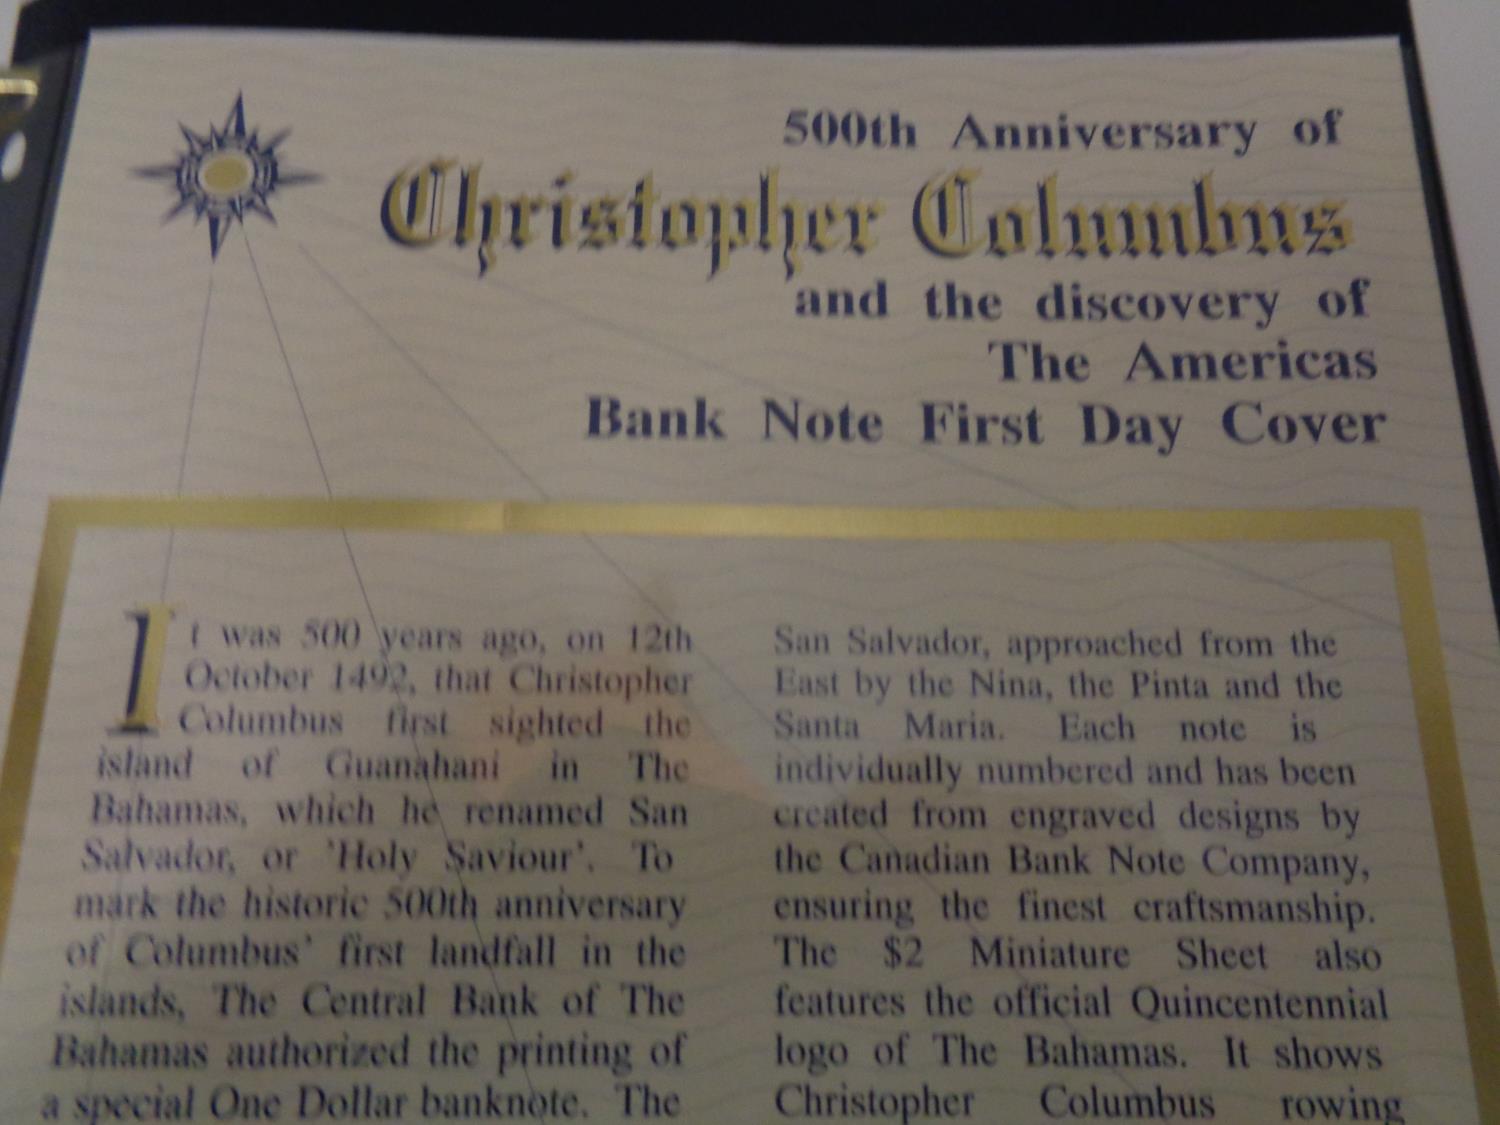 THE MARITIME COLLECTION OF STAMPS IN A BINDER , FEATURING CHRISTOPHER COLUMBUS . NOTED BANKNOTE - Image 7 of 8